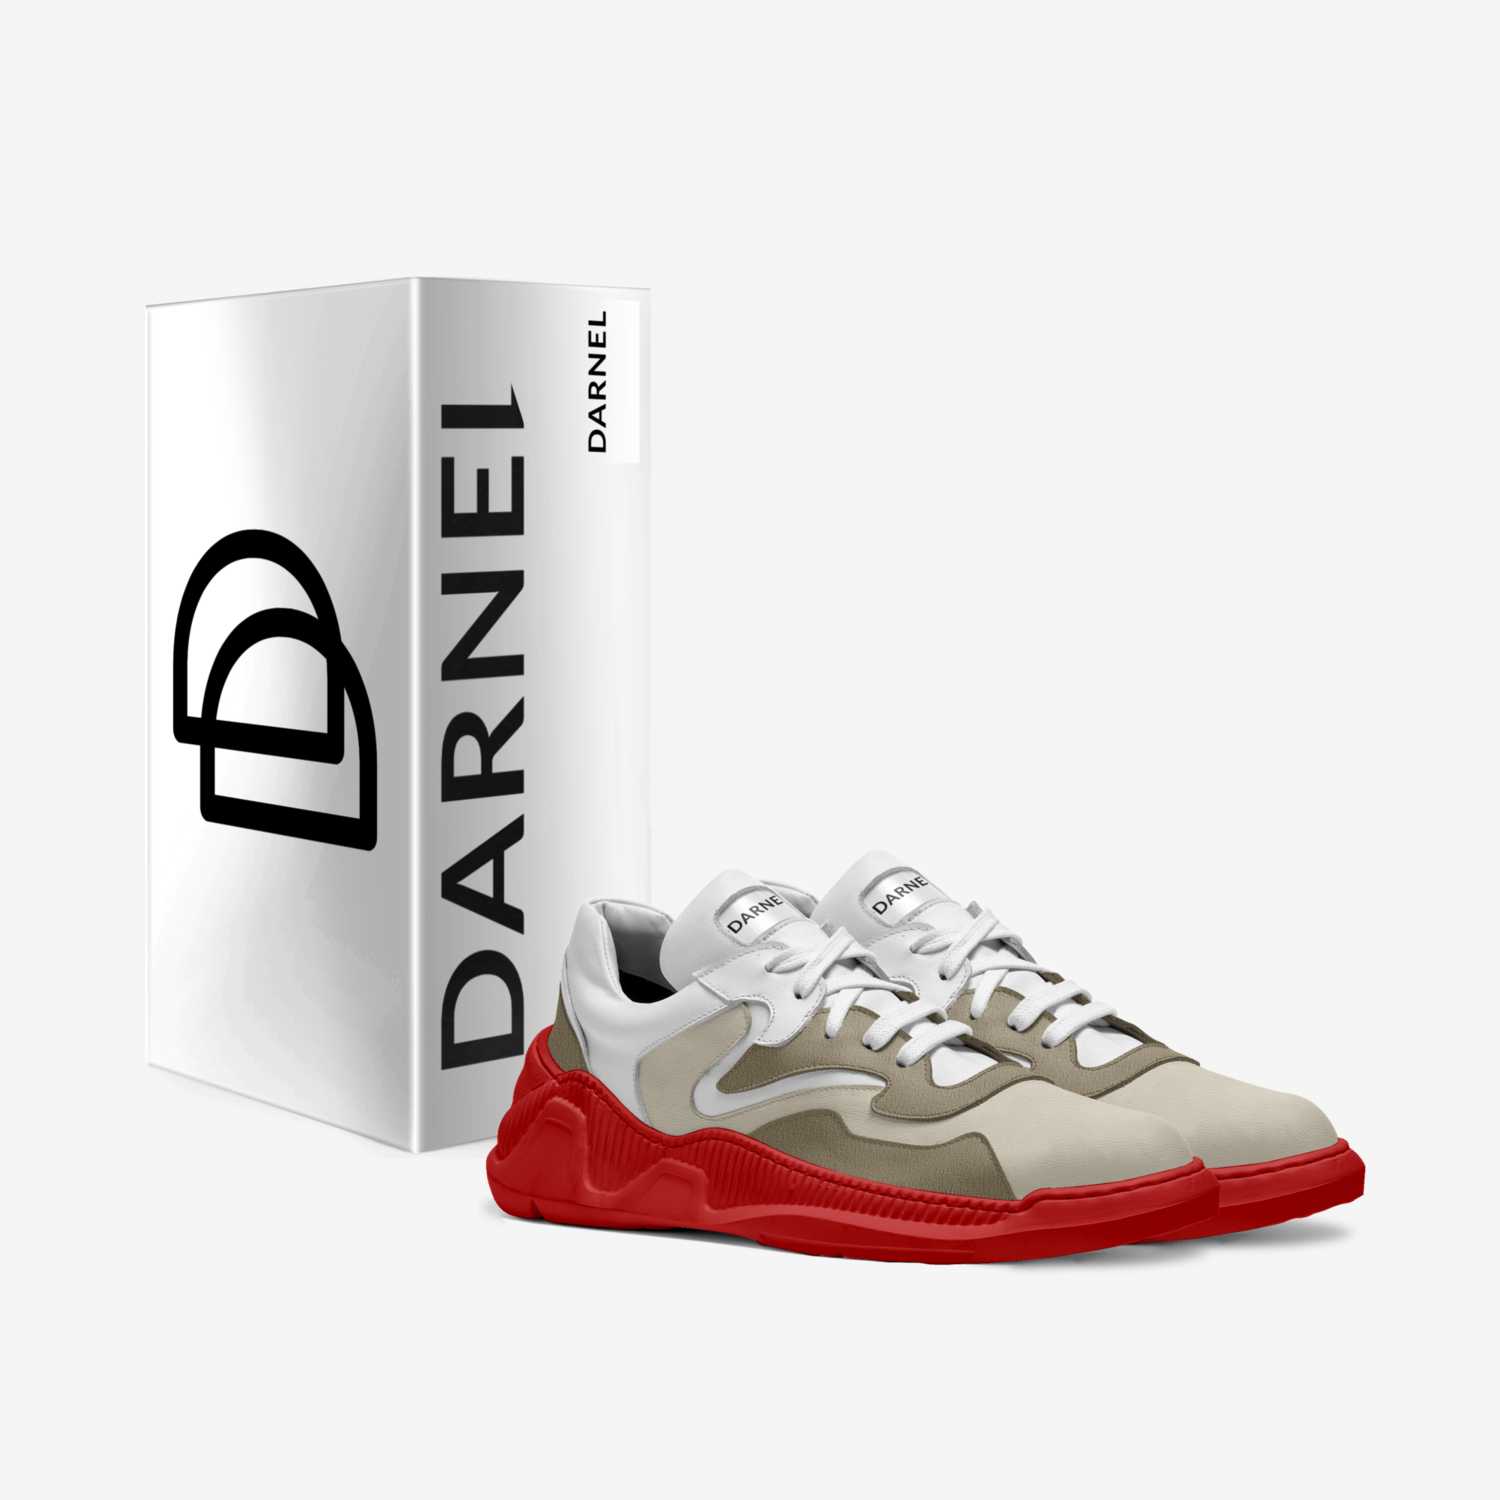 Darnel TC custom made in Italy shoes by Kevin Jones | Box view